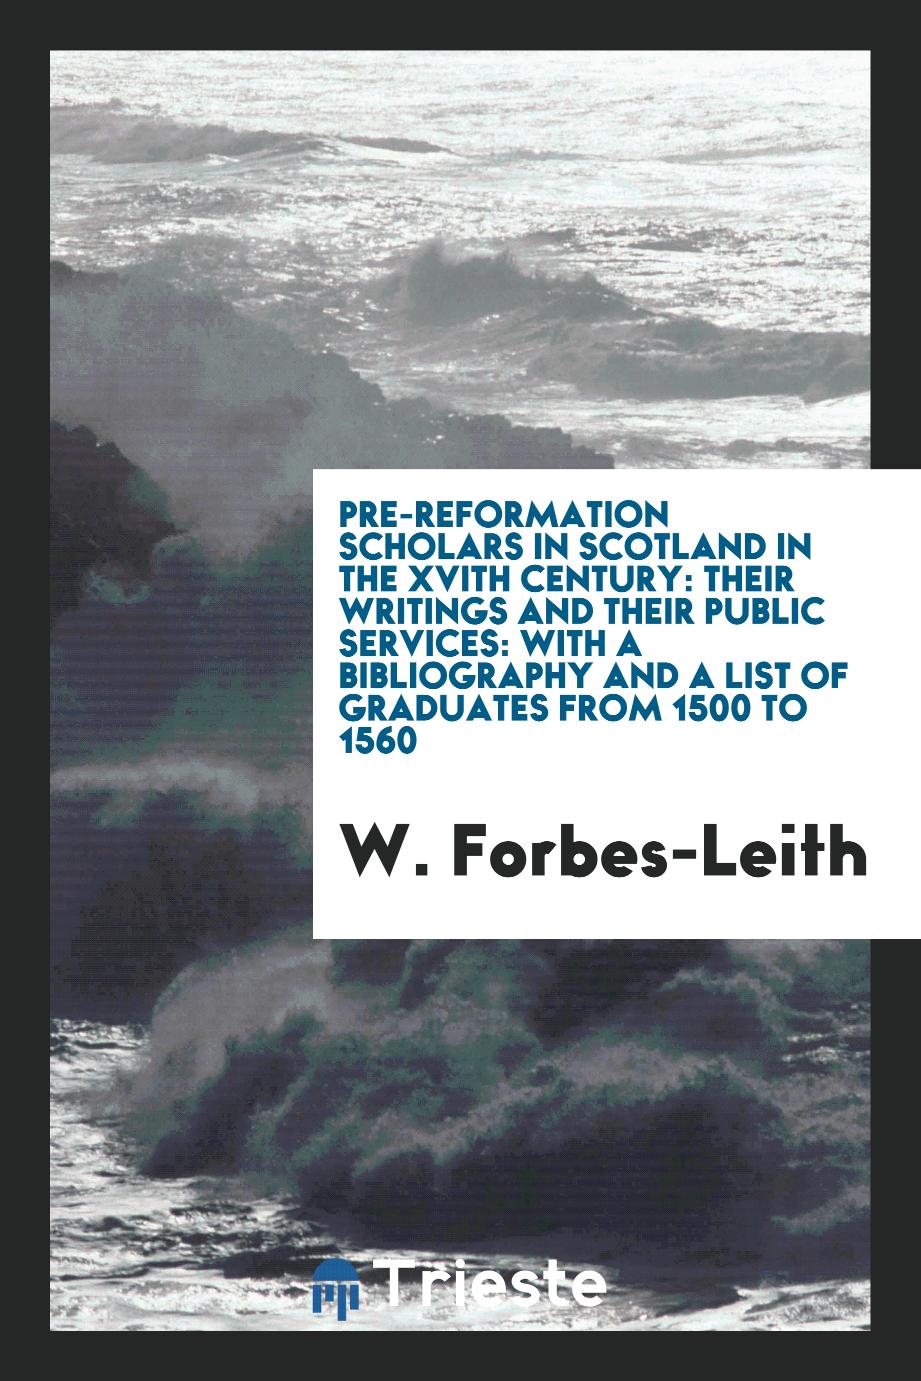 Pre-reformation scholars in Scotland in the XVIth century: their writings and their public services: with a bibliography and a list of graduates from 1500 to 1560